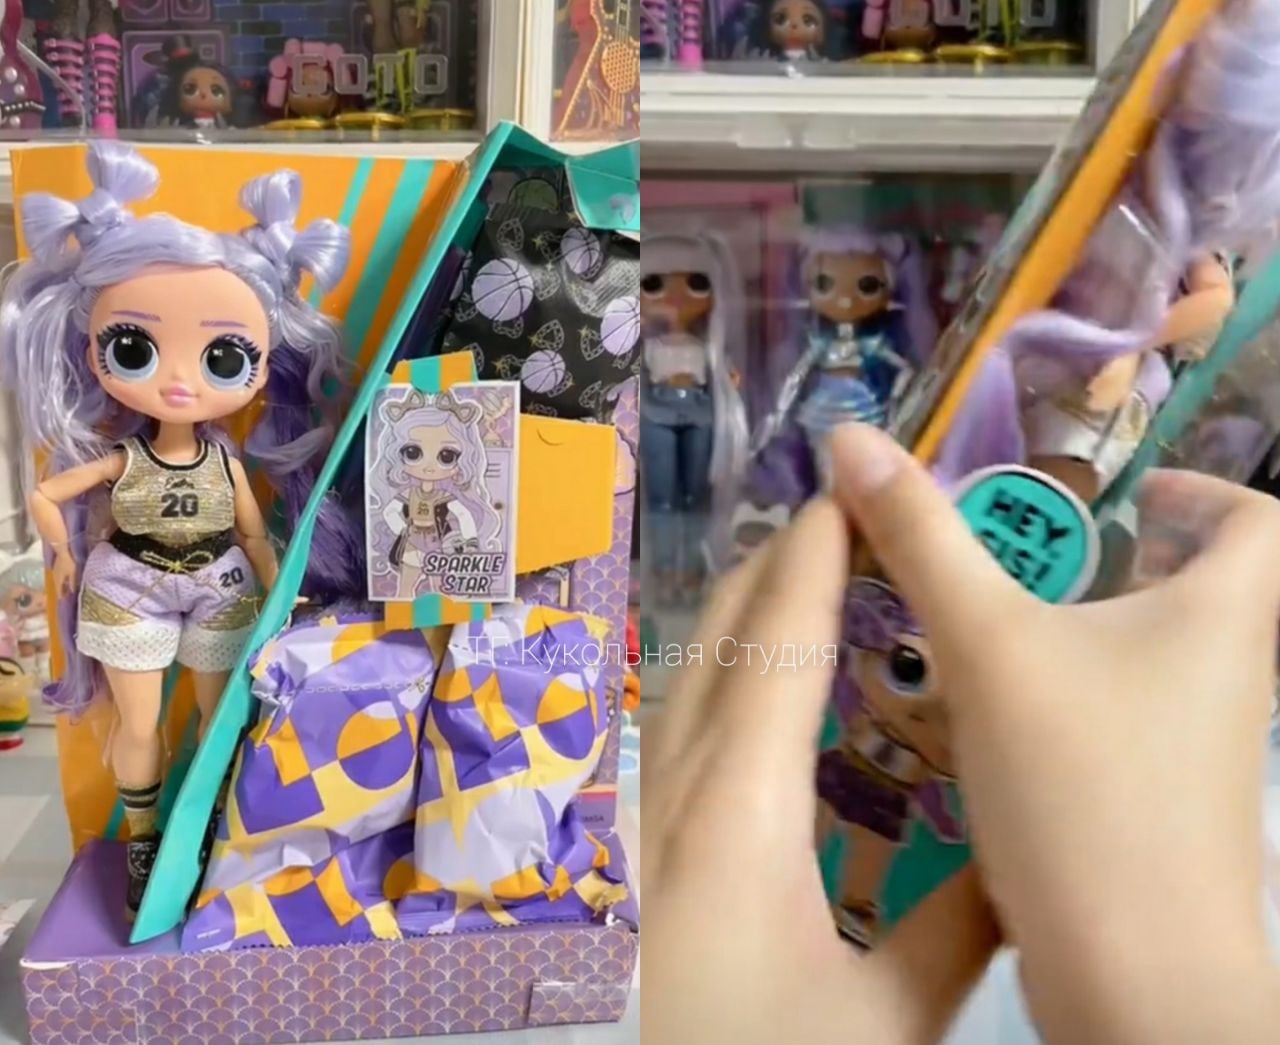 LOL OMG Sports series 3 dolls Sparkle Star and Court Cutie